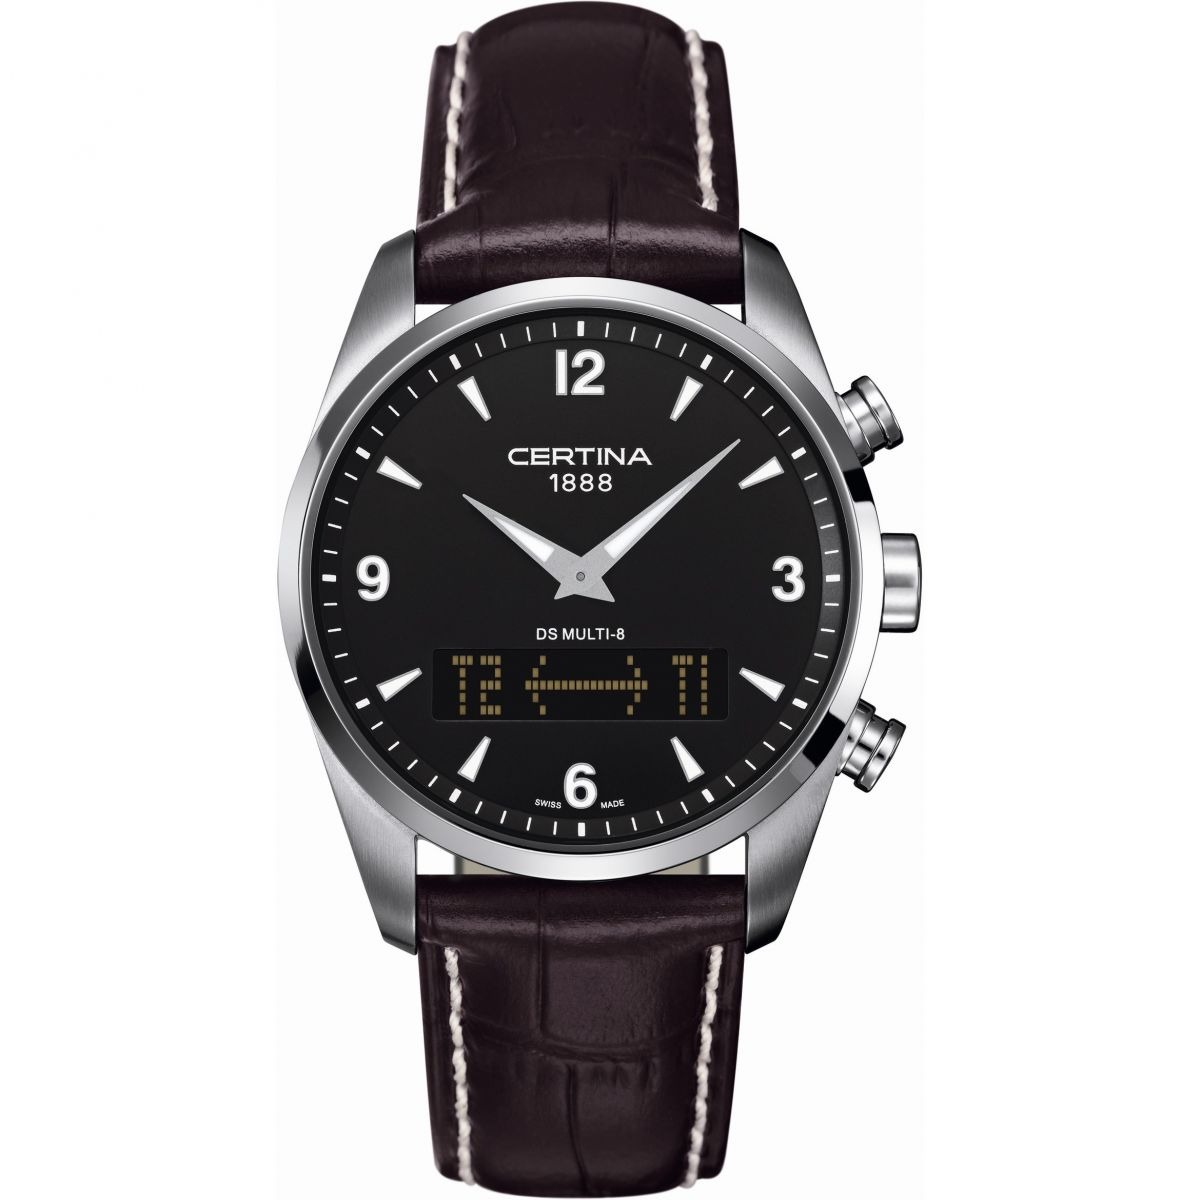 Certina - Black Chronograph Watch for Men from Watch Shop GOOFASH